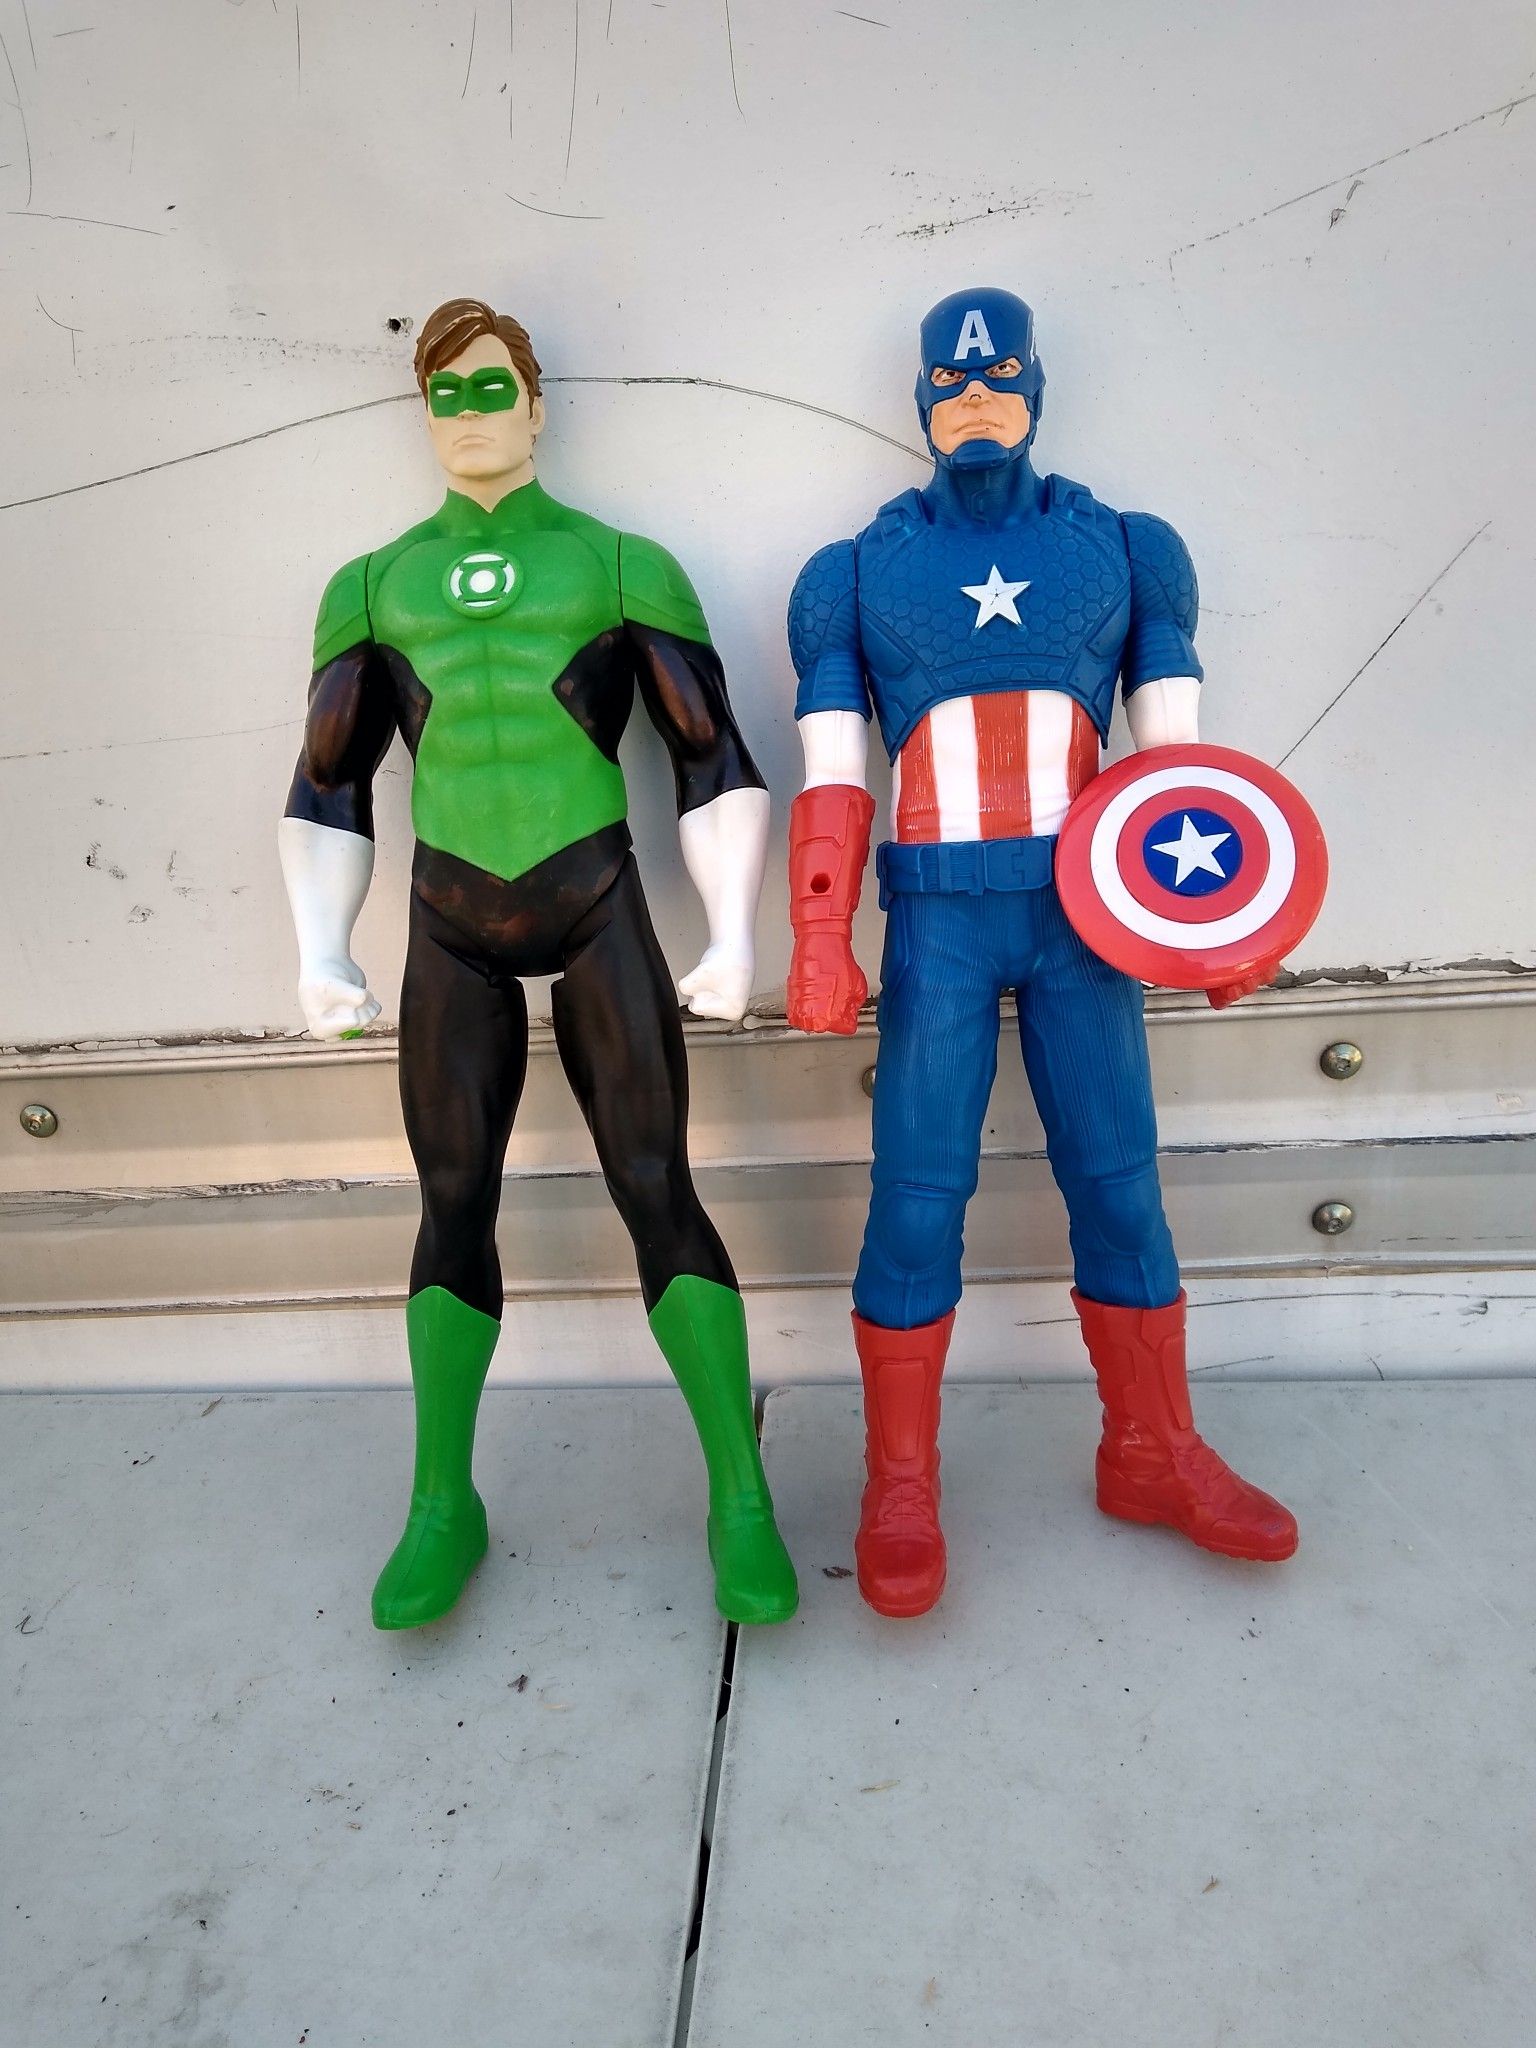 The Green lantern and Captain America big action figures